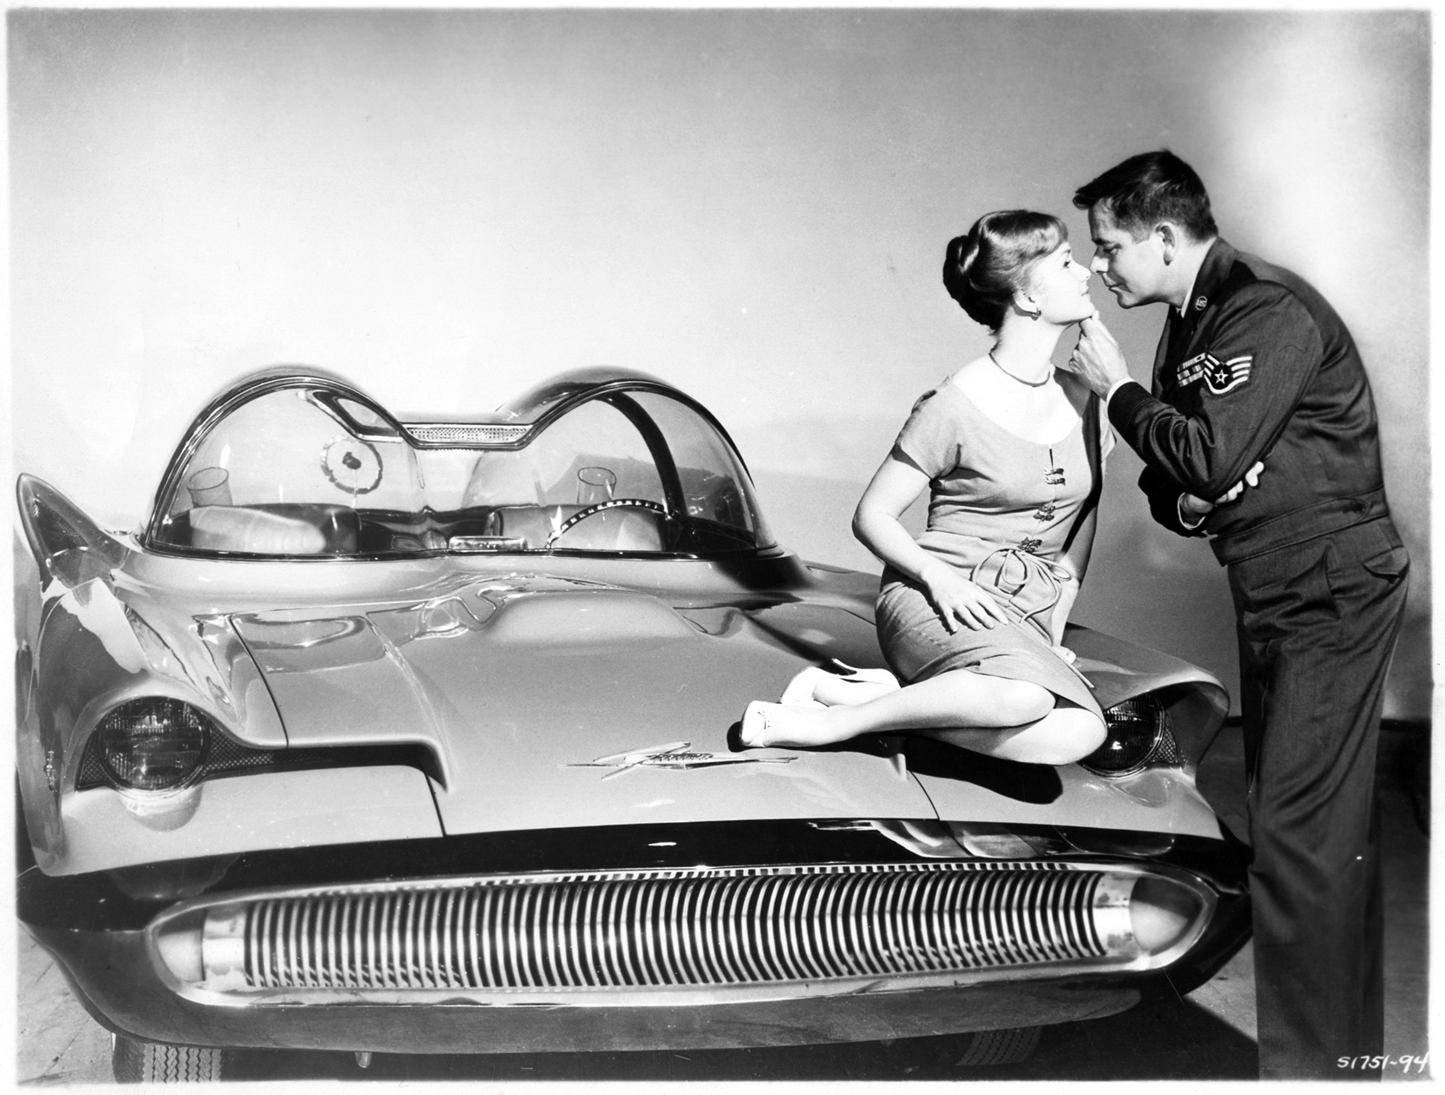 Debbie Reynolds and Glenn Ford posing with a 1955 Lincoln Futura car. This experimental car was featured in the 1959 film, "It started with a kiss."